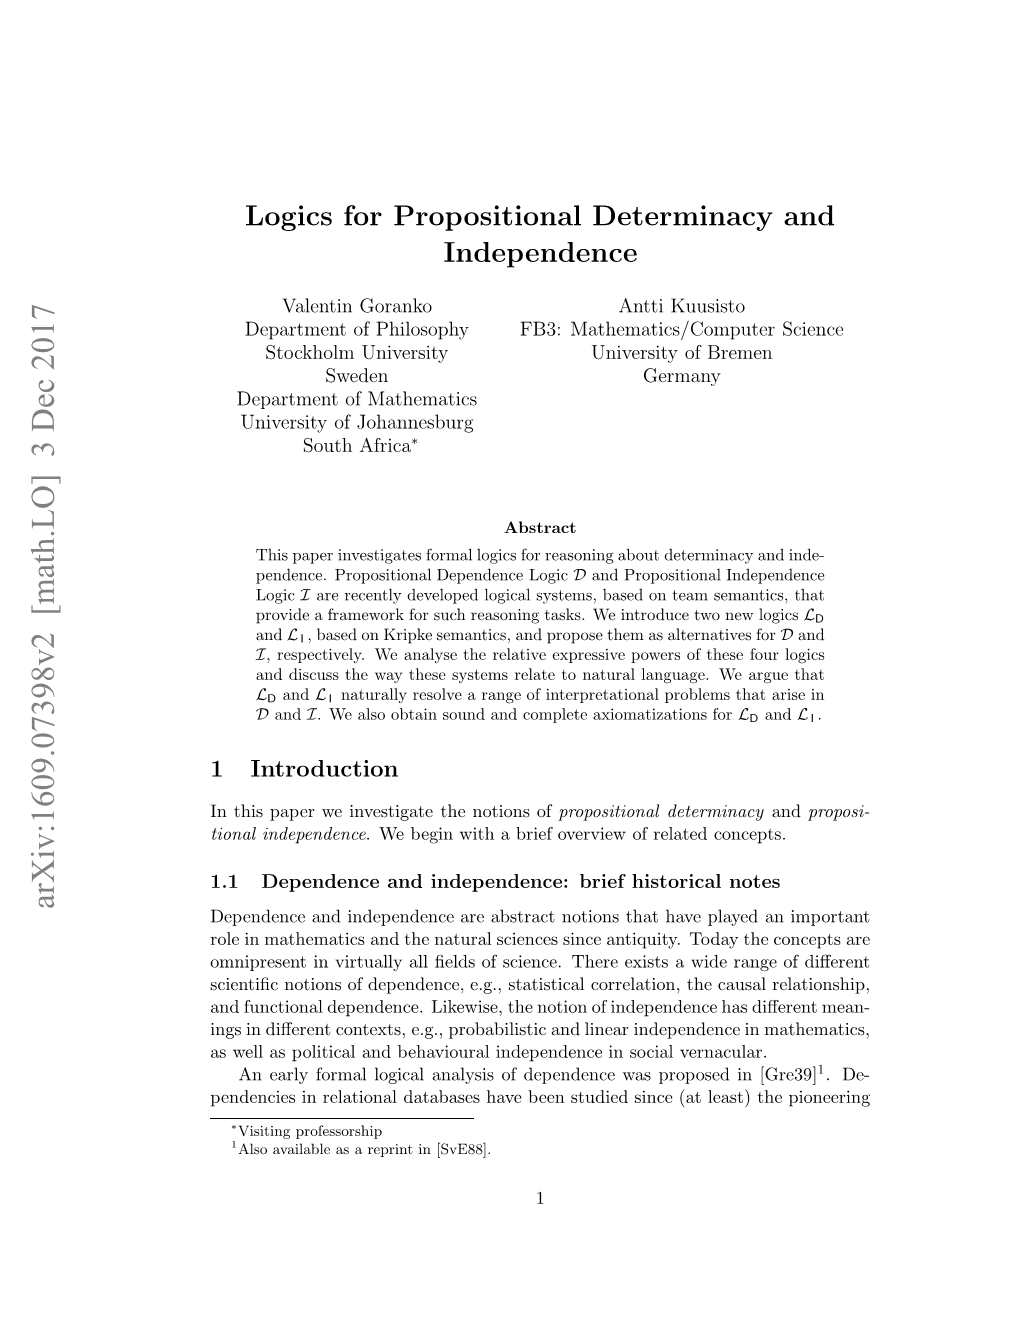 Logics for Propositional Determinacy and Independence